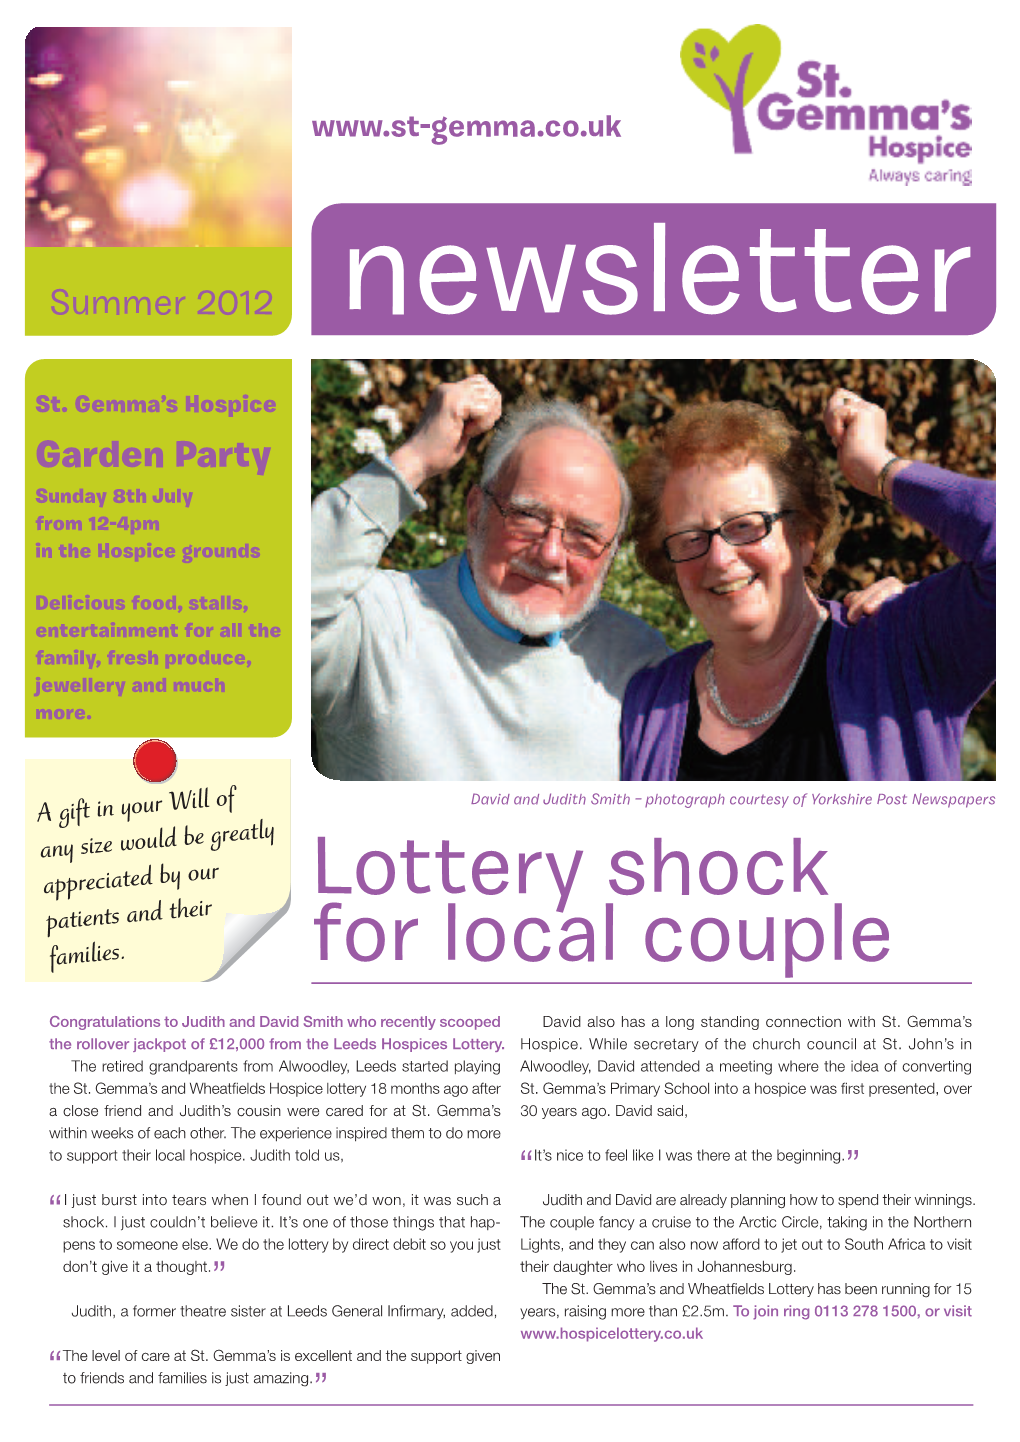 Lottery Shock for Local Couple